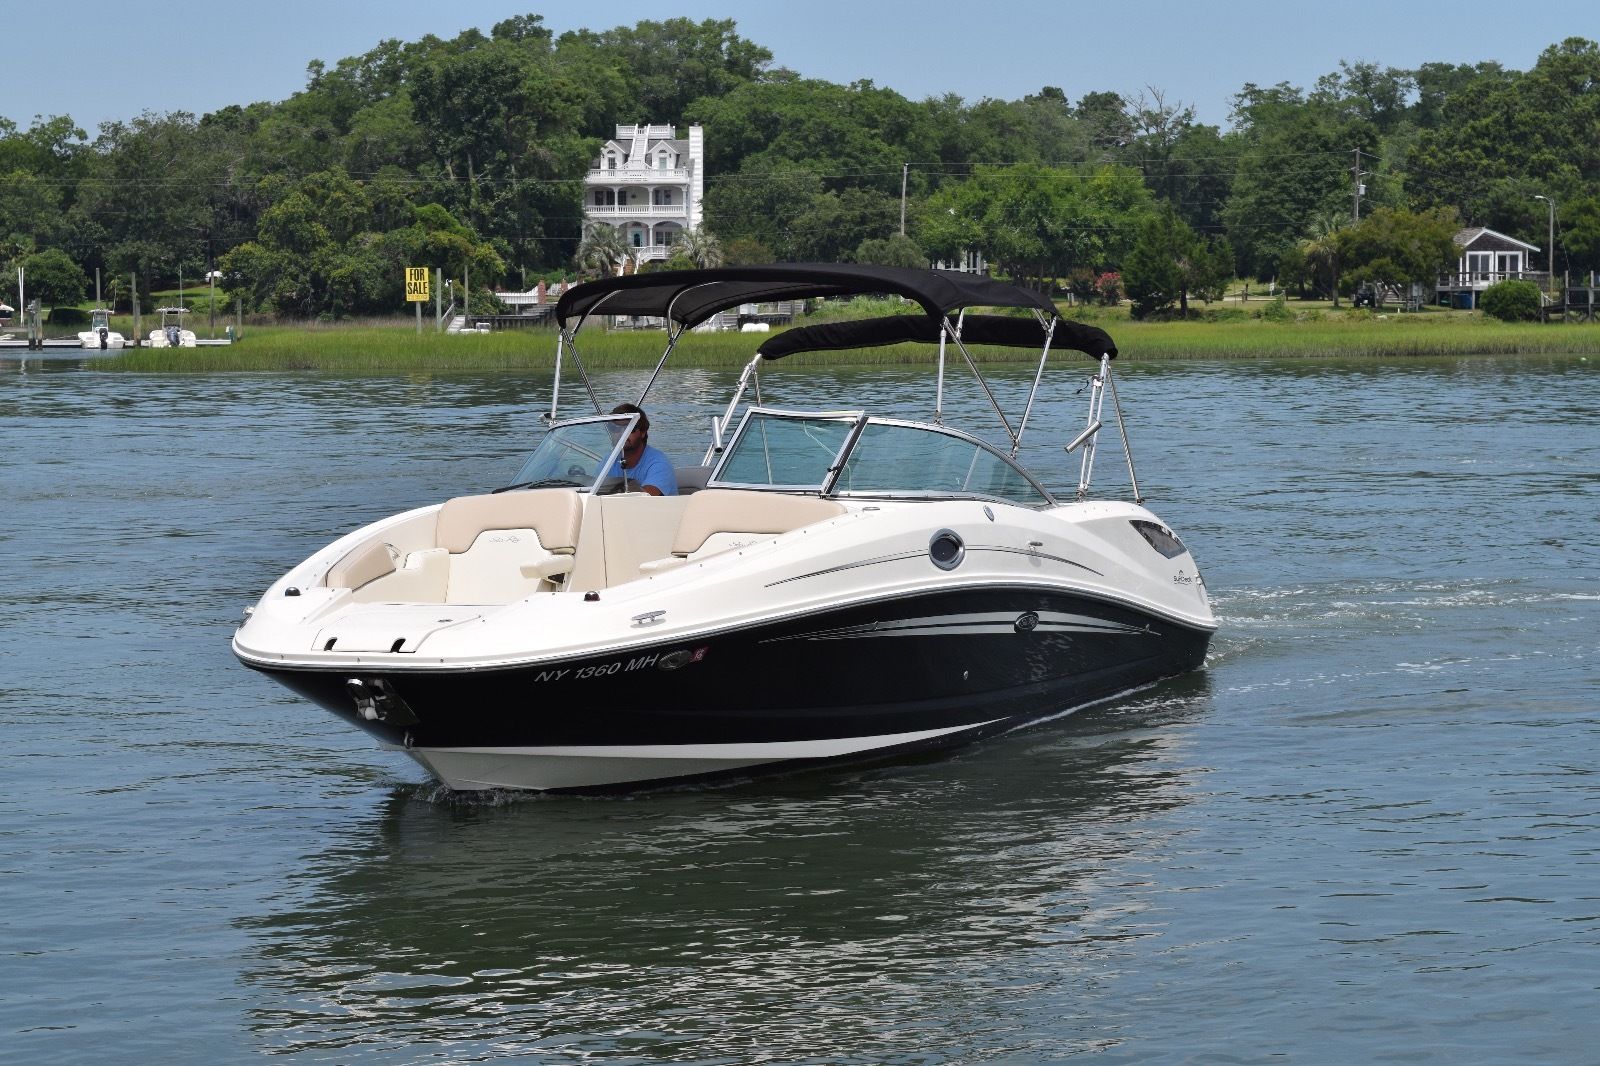 Sea Ray 290 Sundeck 2009 for sale for $40,000 - Boats-from ...